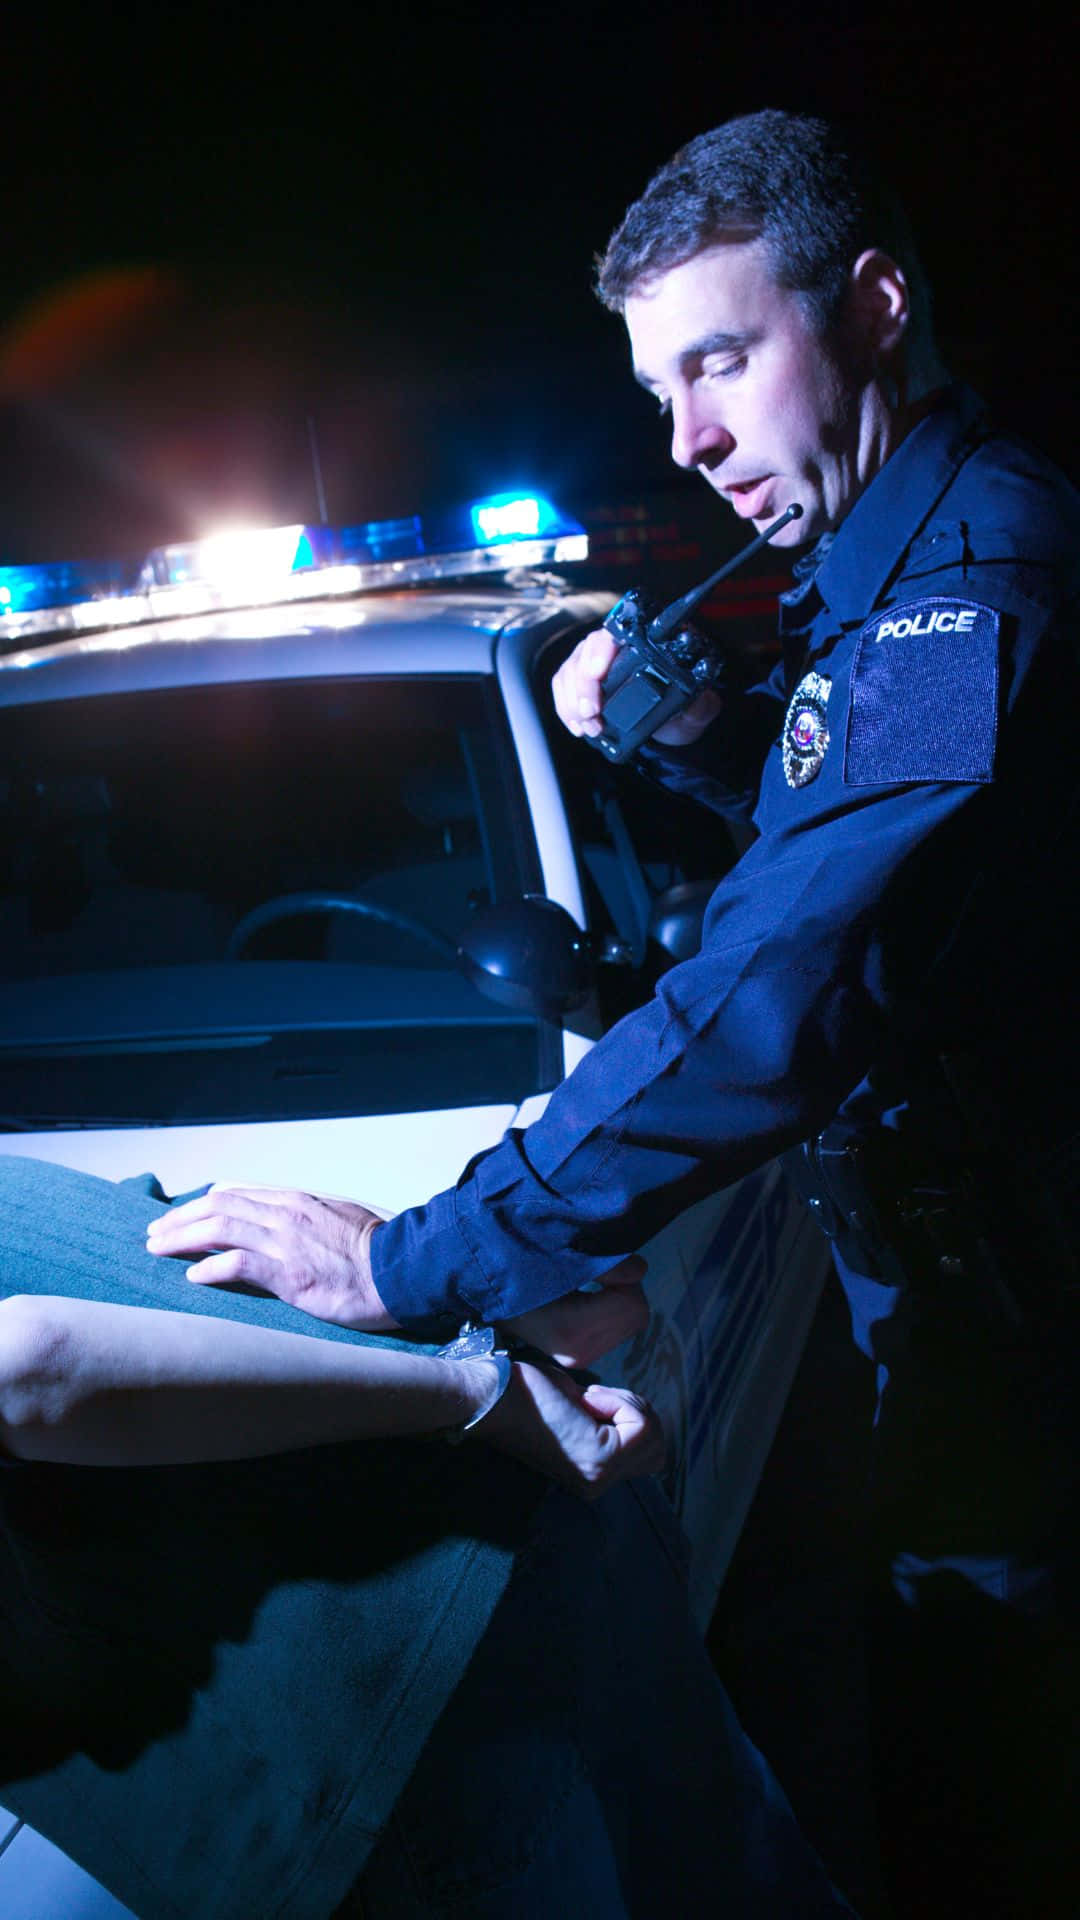 Cop Arresting A Man During Dui Checkpoint